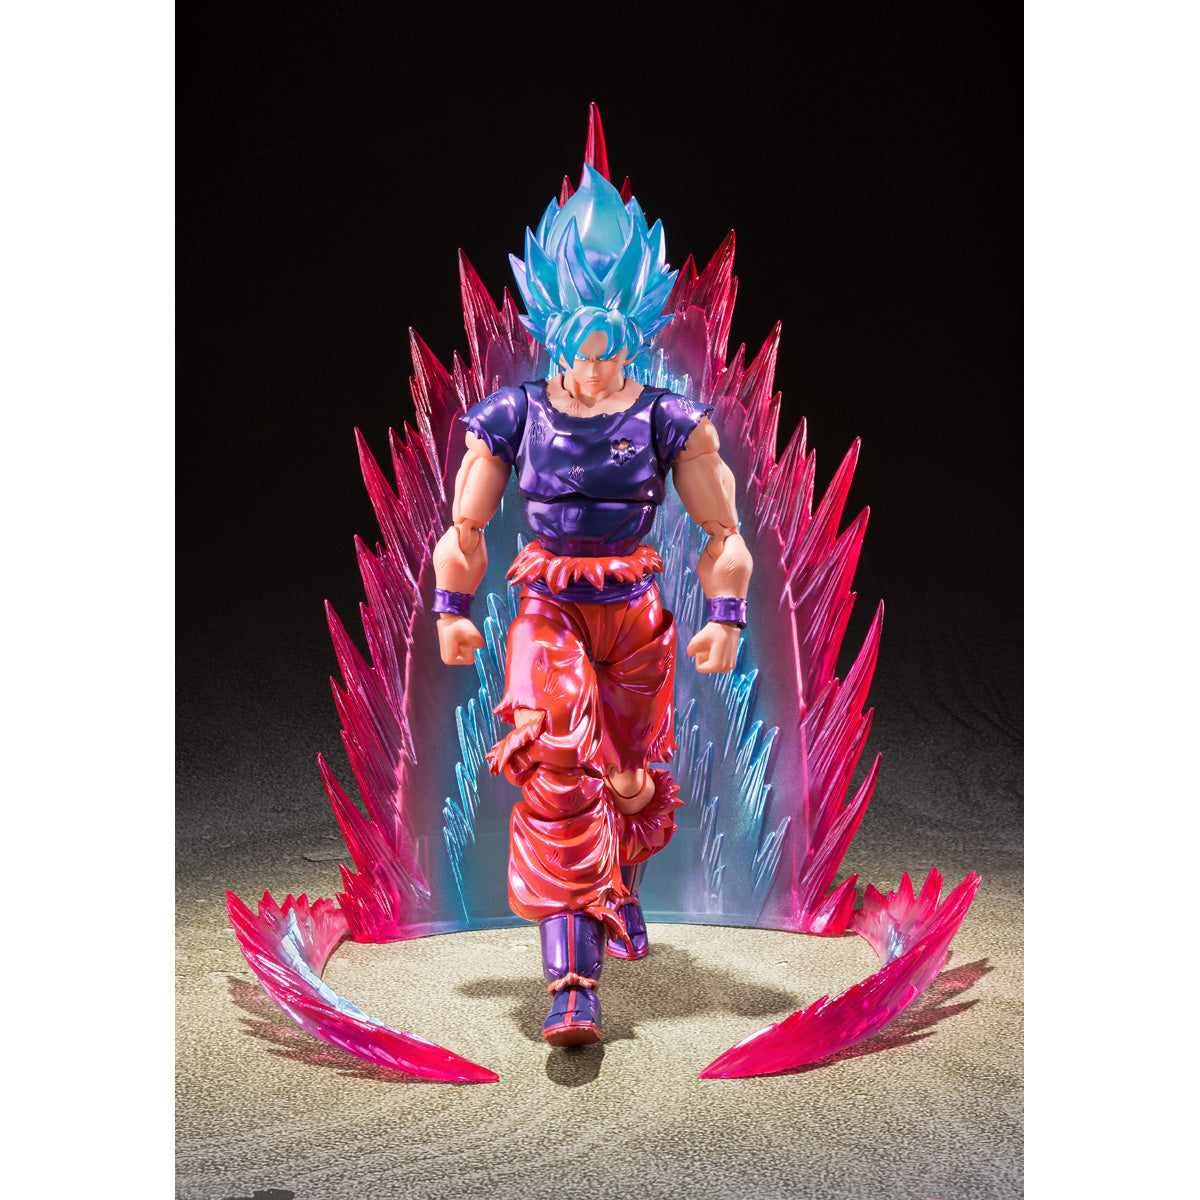 Demoniacal Fit Dragon Ball Super Counterattacking K (Whis Gi Son Goku)  Action Figure Review 